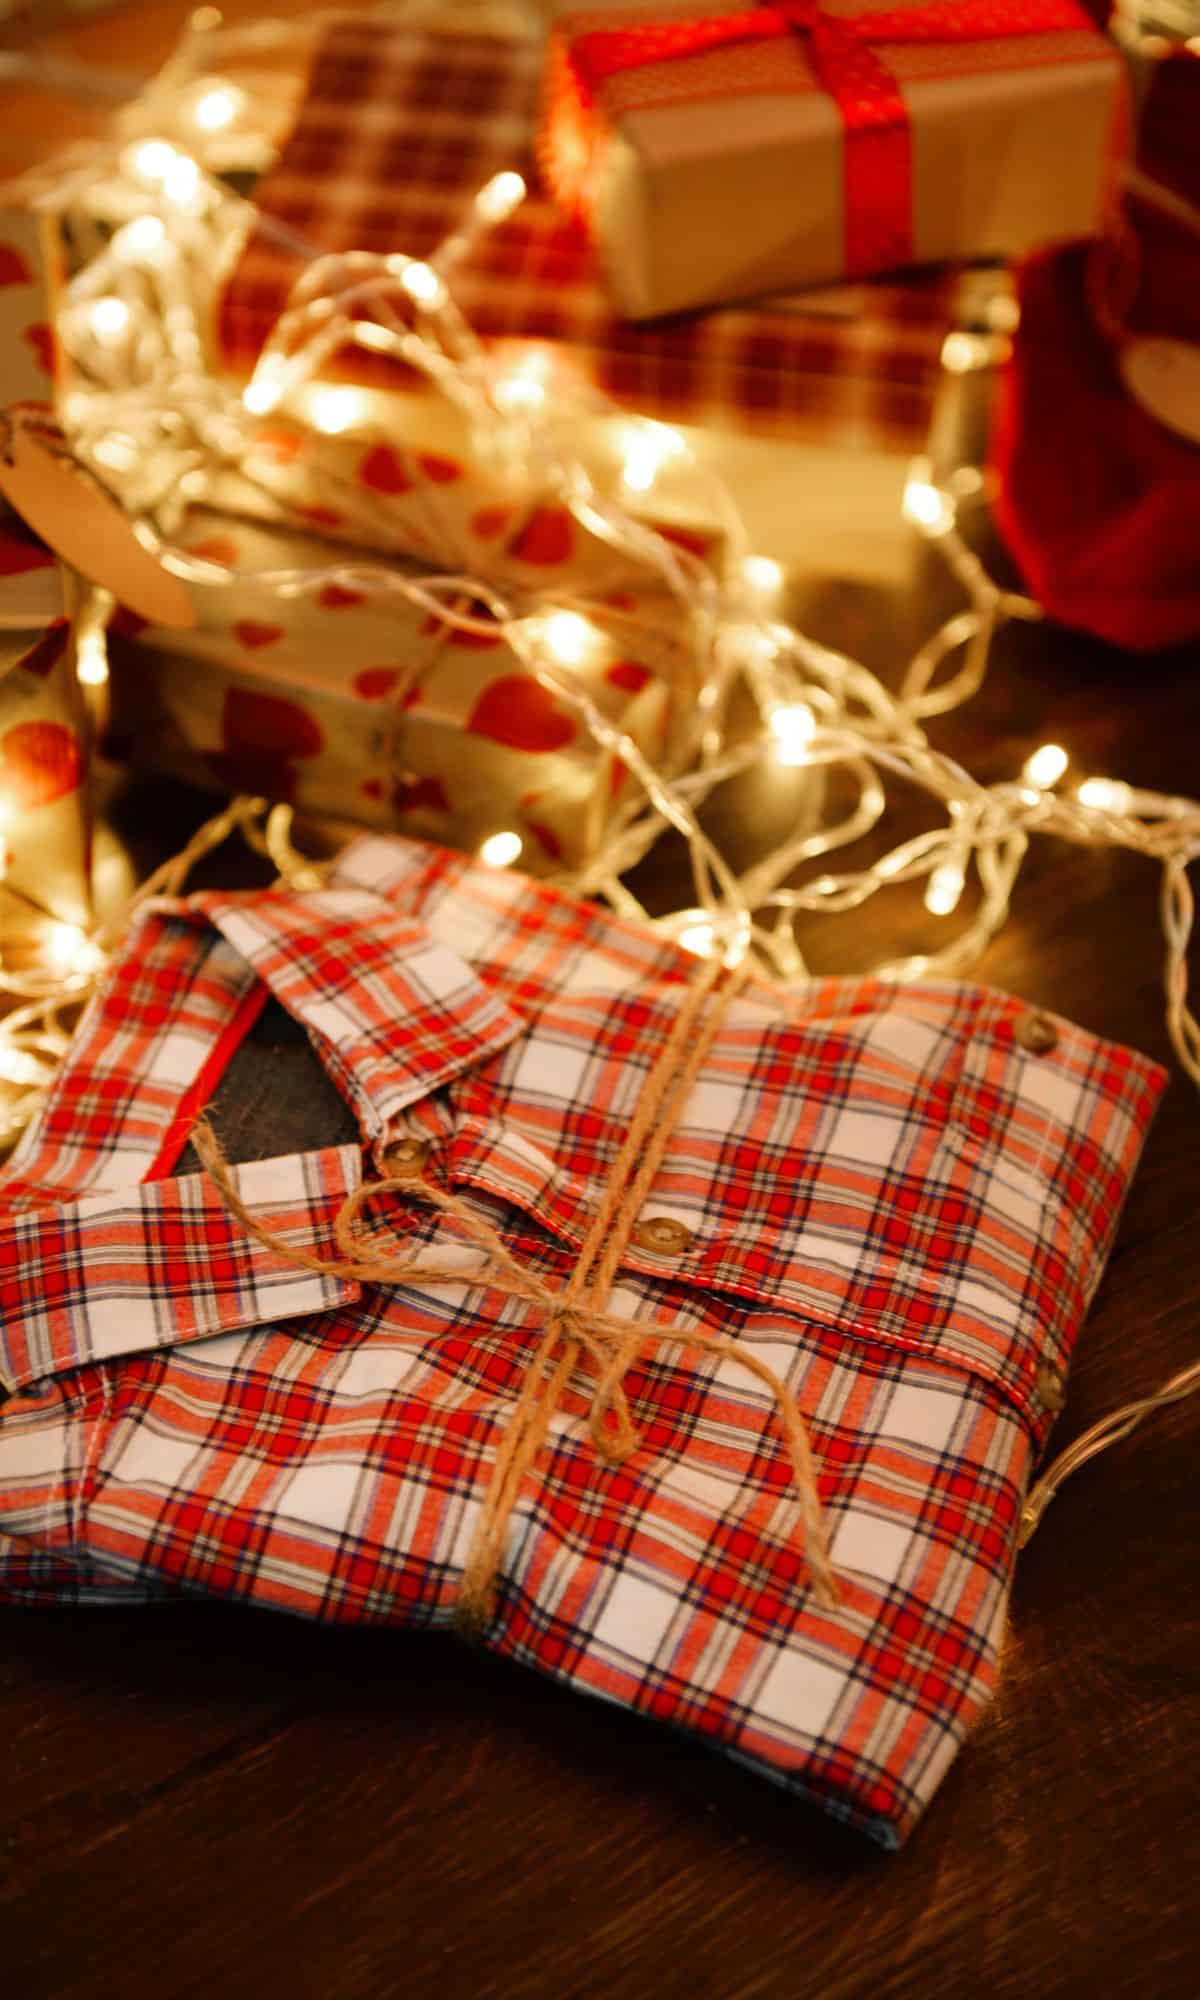 A pair of red plaid pajamas wrapped in twine under a Christmas tree surrounded by white Christmas lights